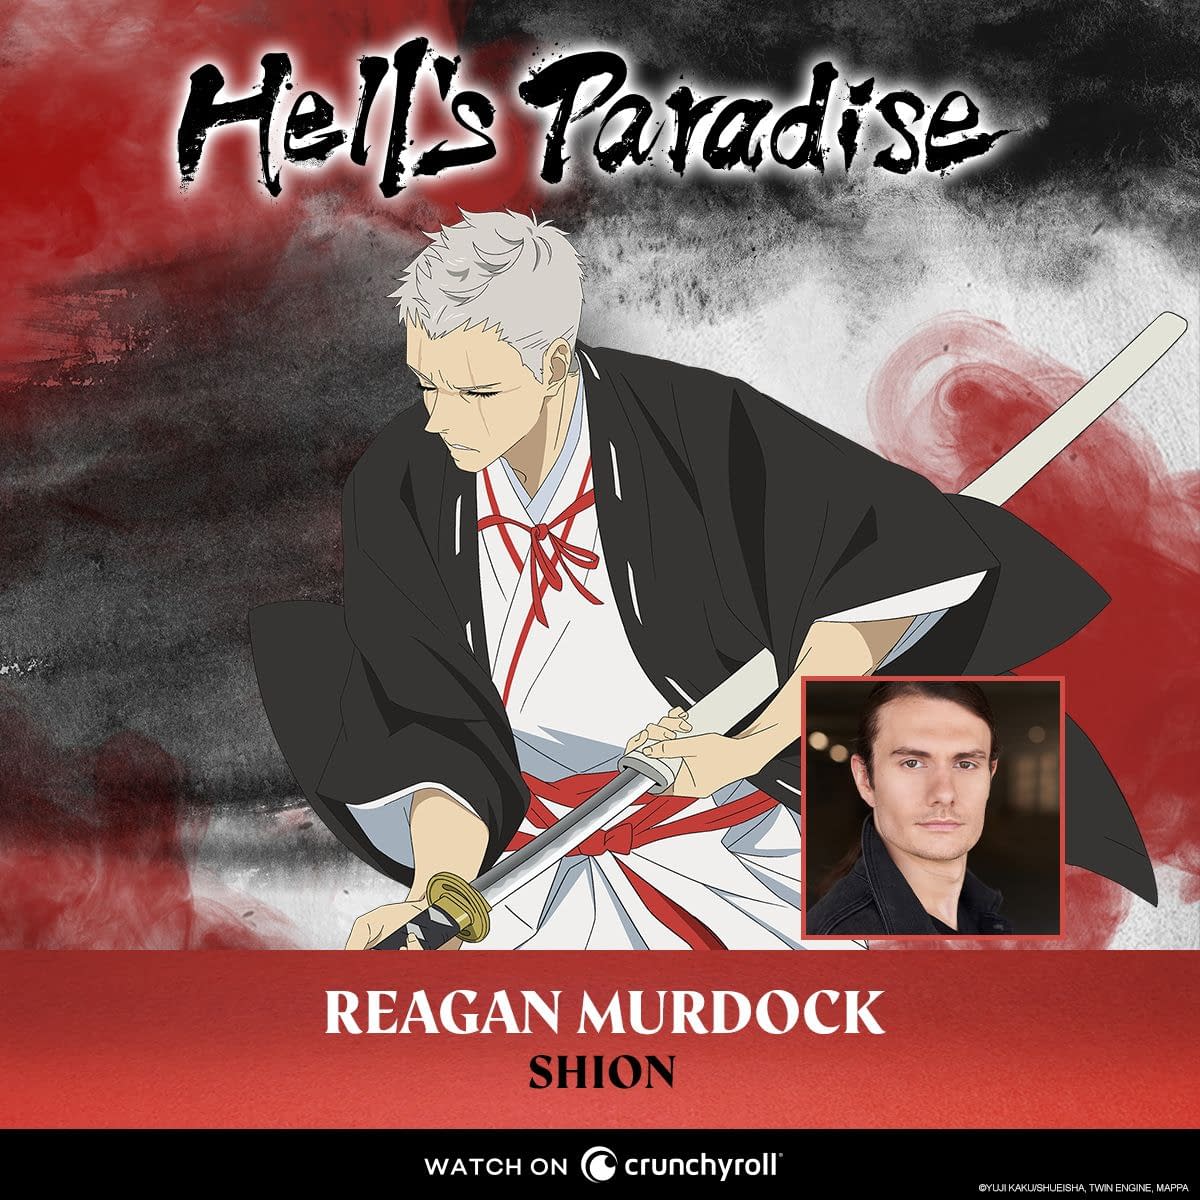 Hell's Paradise Streaming on Netflix in India, Not Crunchyroll